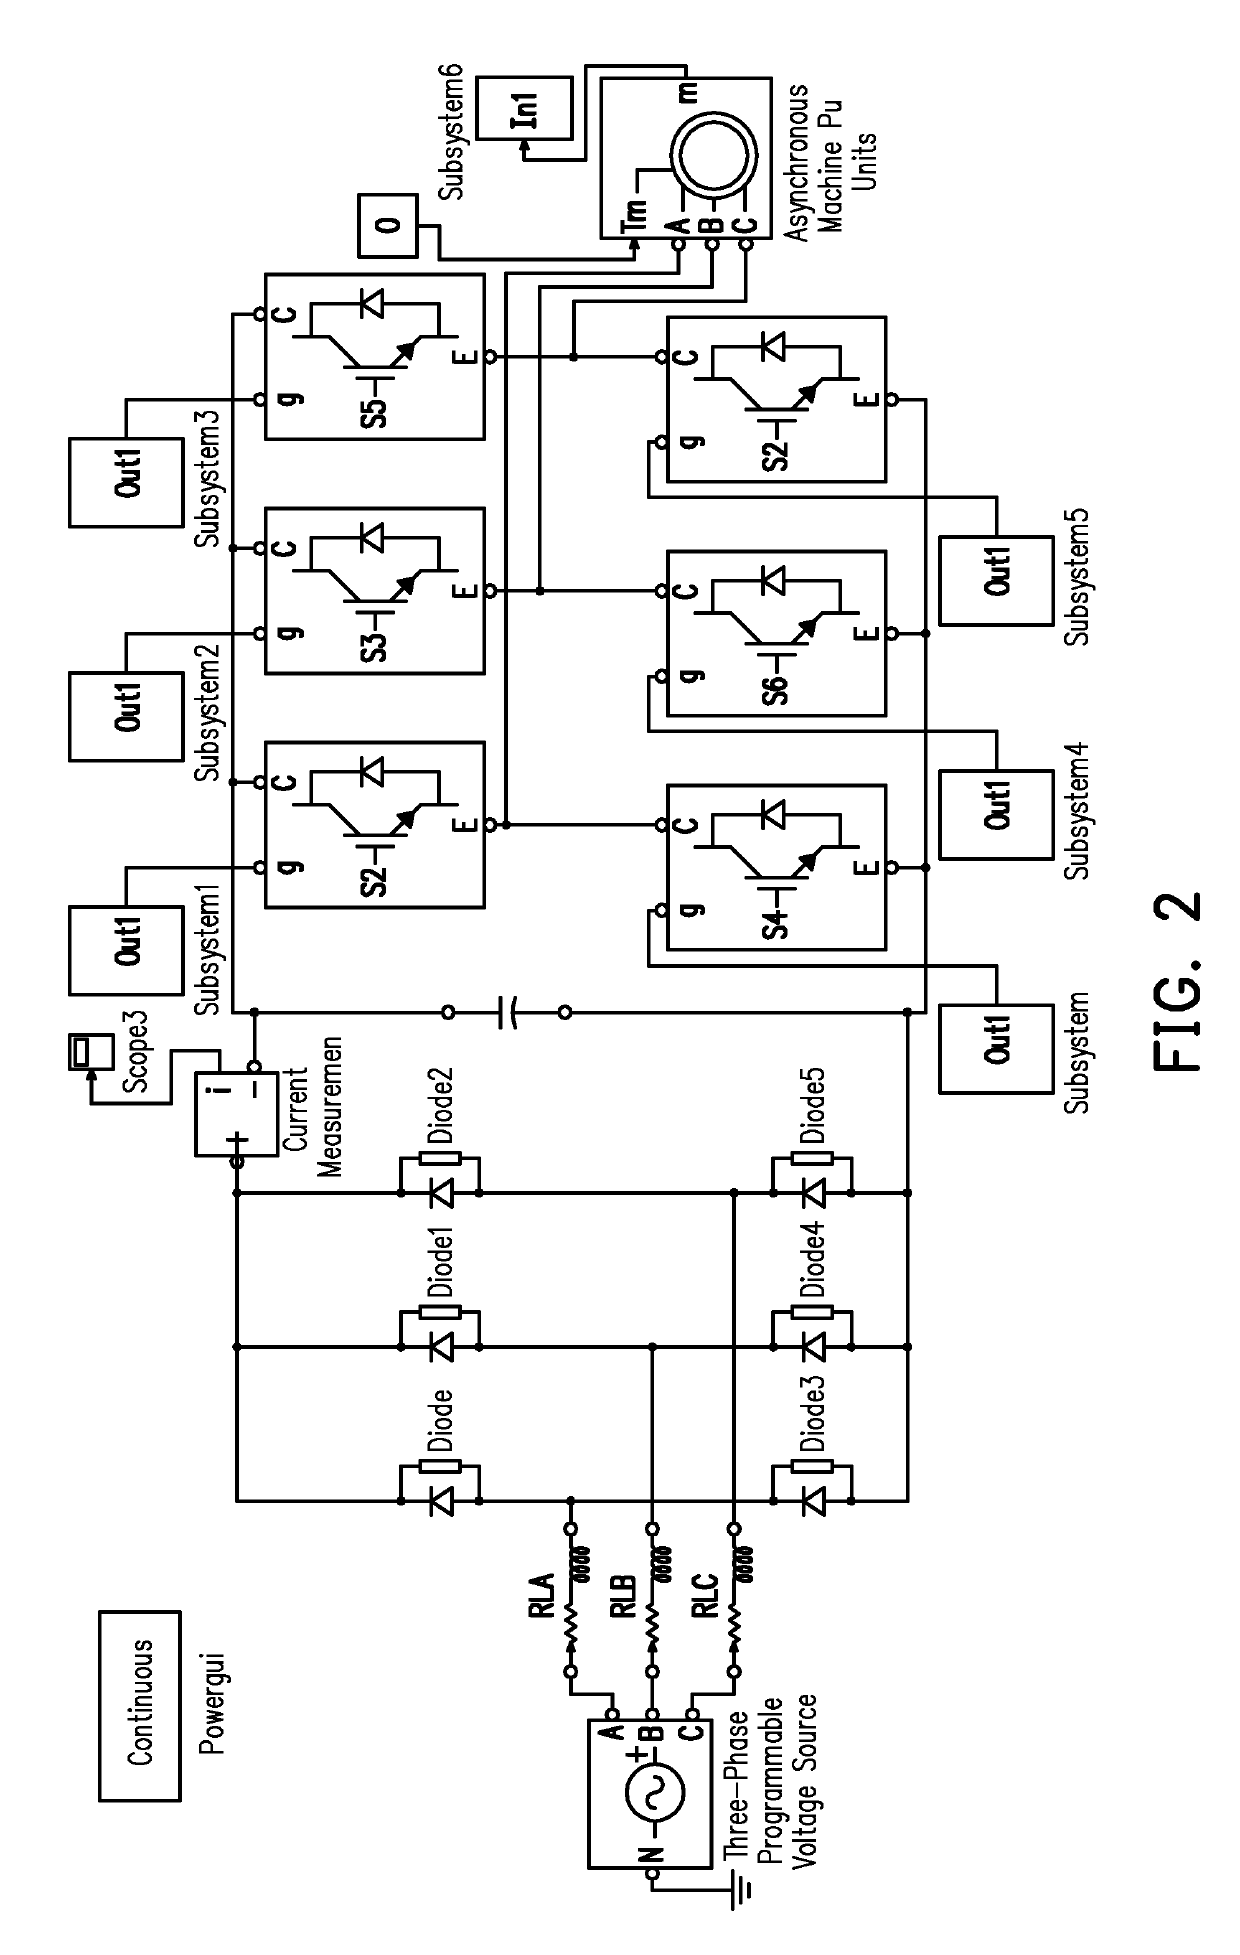 Fault diagnosis method for series hybrid electric vehicle ac/dc converter